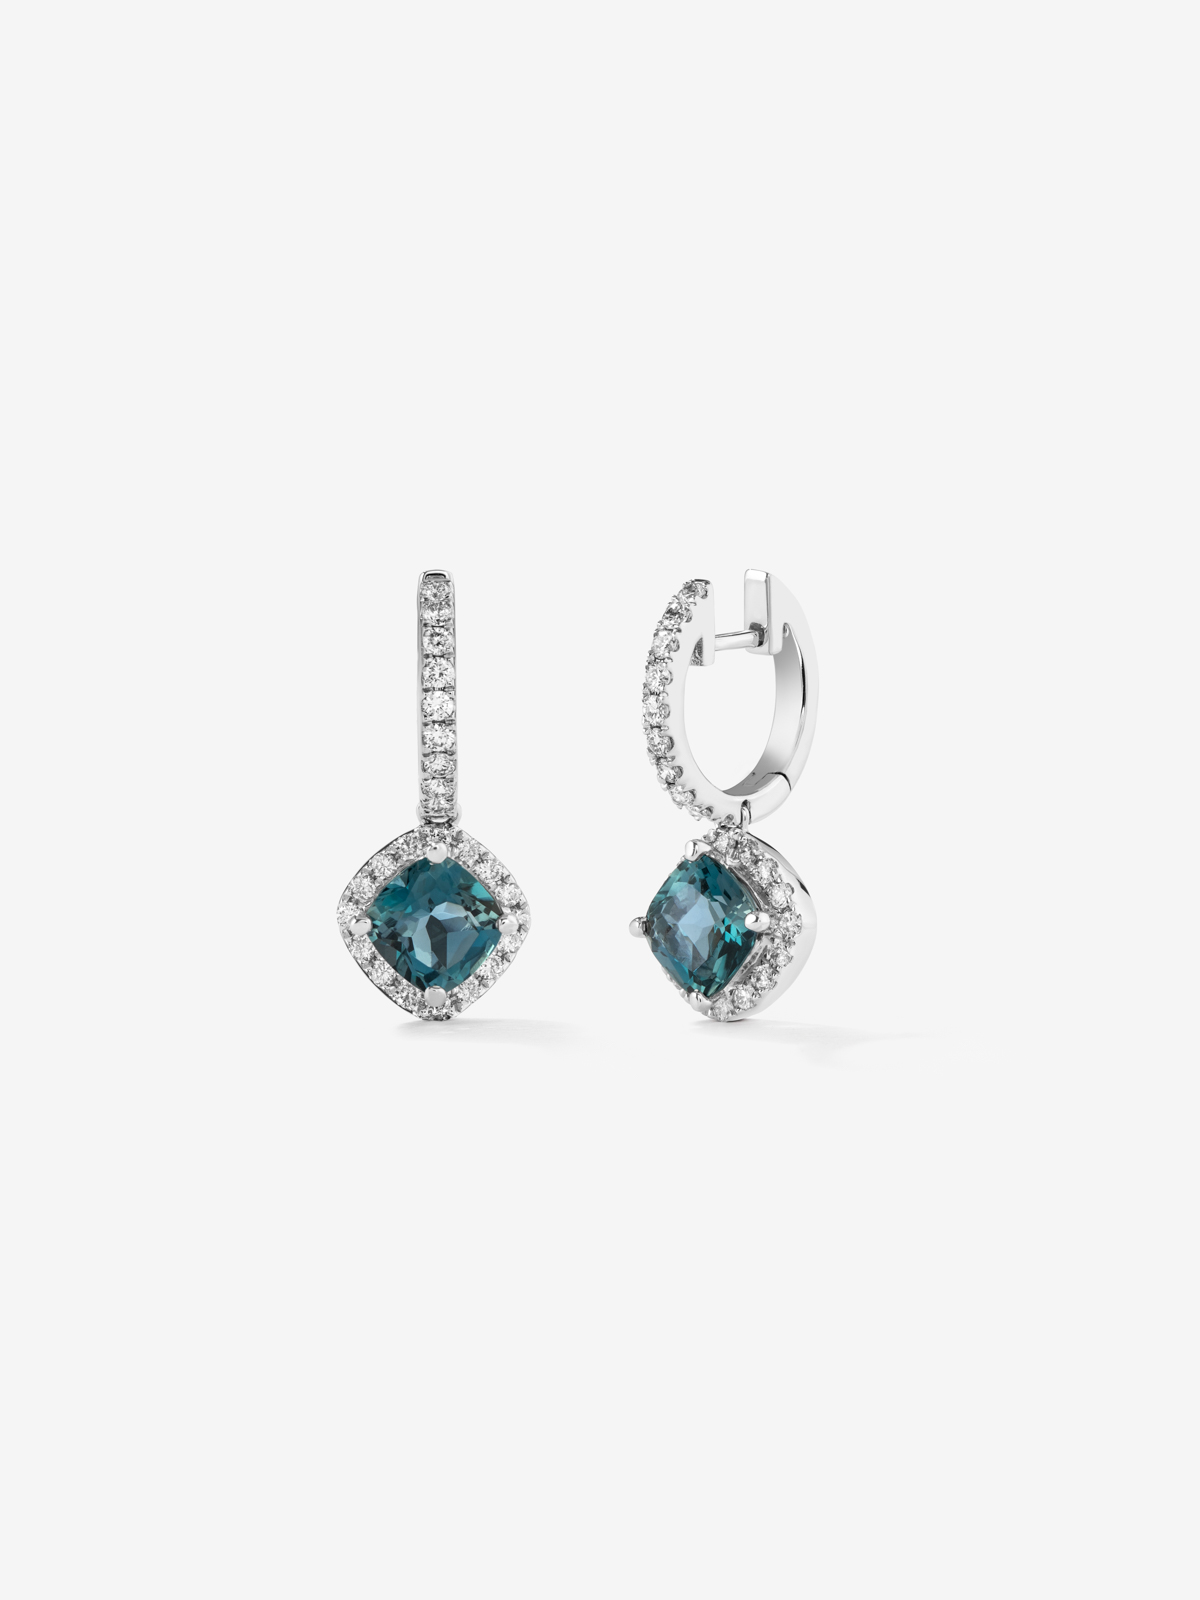 18kt white gold hoop earrings with London blue topaz stone of 1.08cts and diamonds.